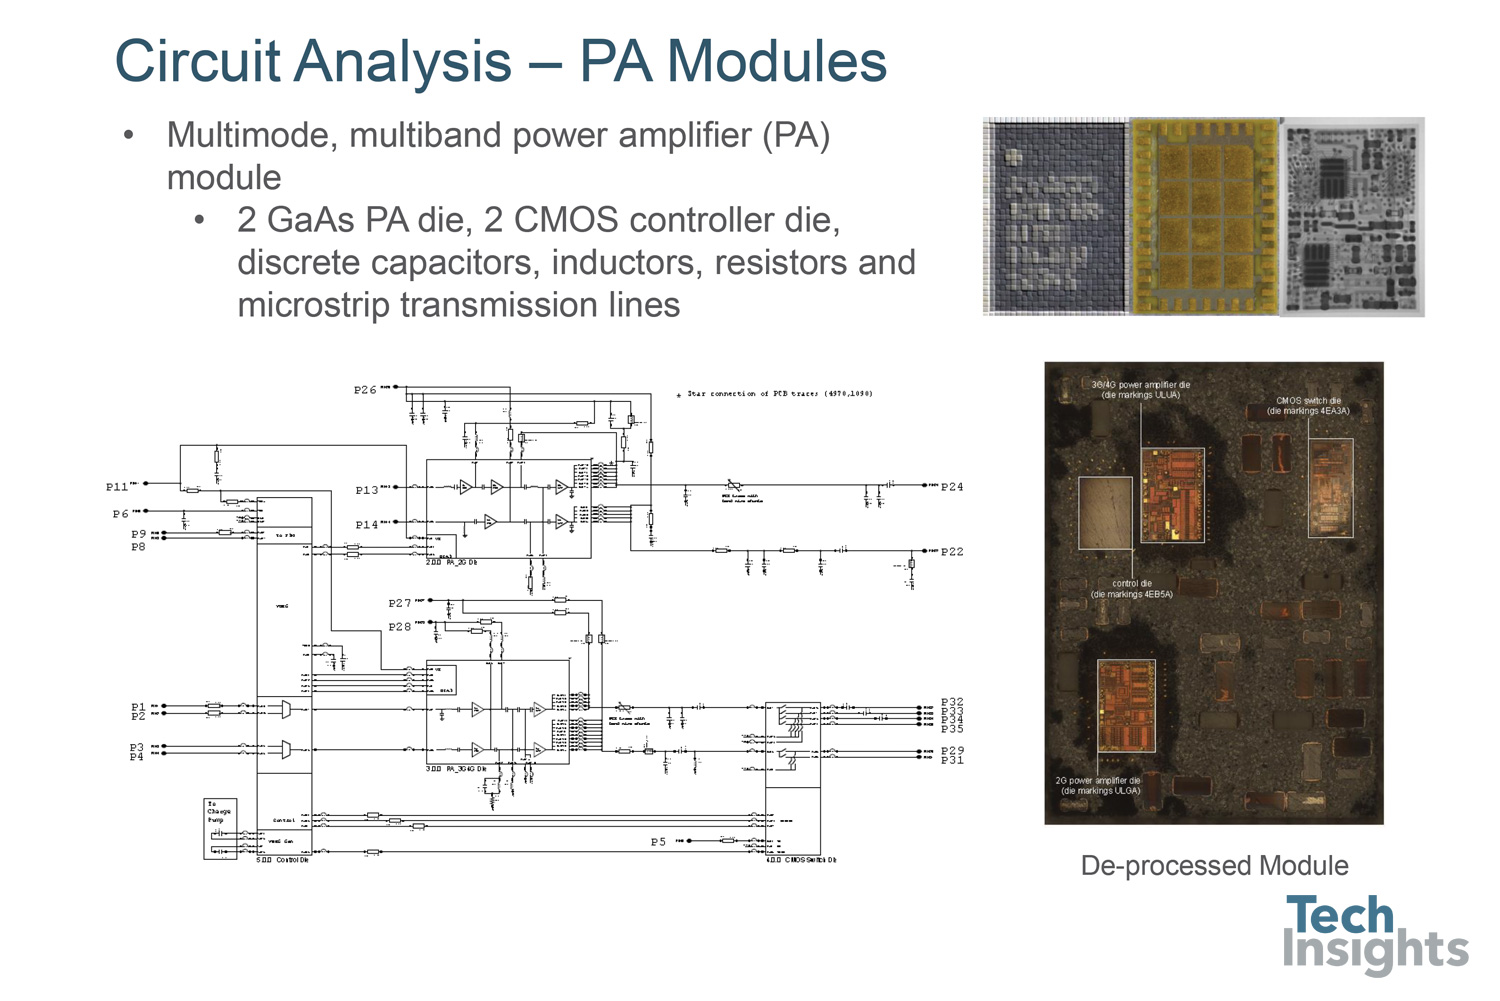 Circuit analysis of a power amp module. This analysis examines the various chips within the module at the transistor level, as well as re-creating the system level schematic of the module as a whole